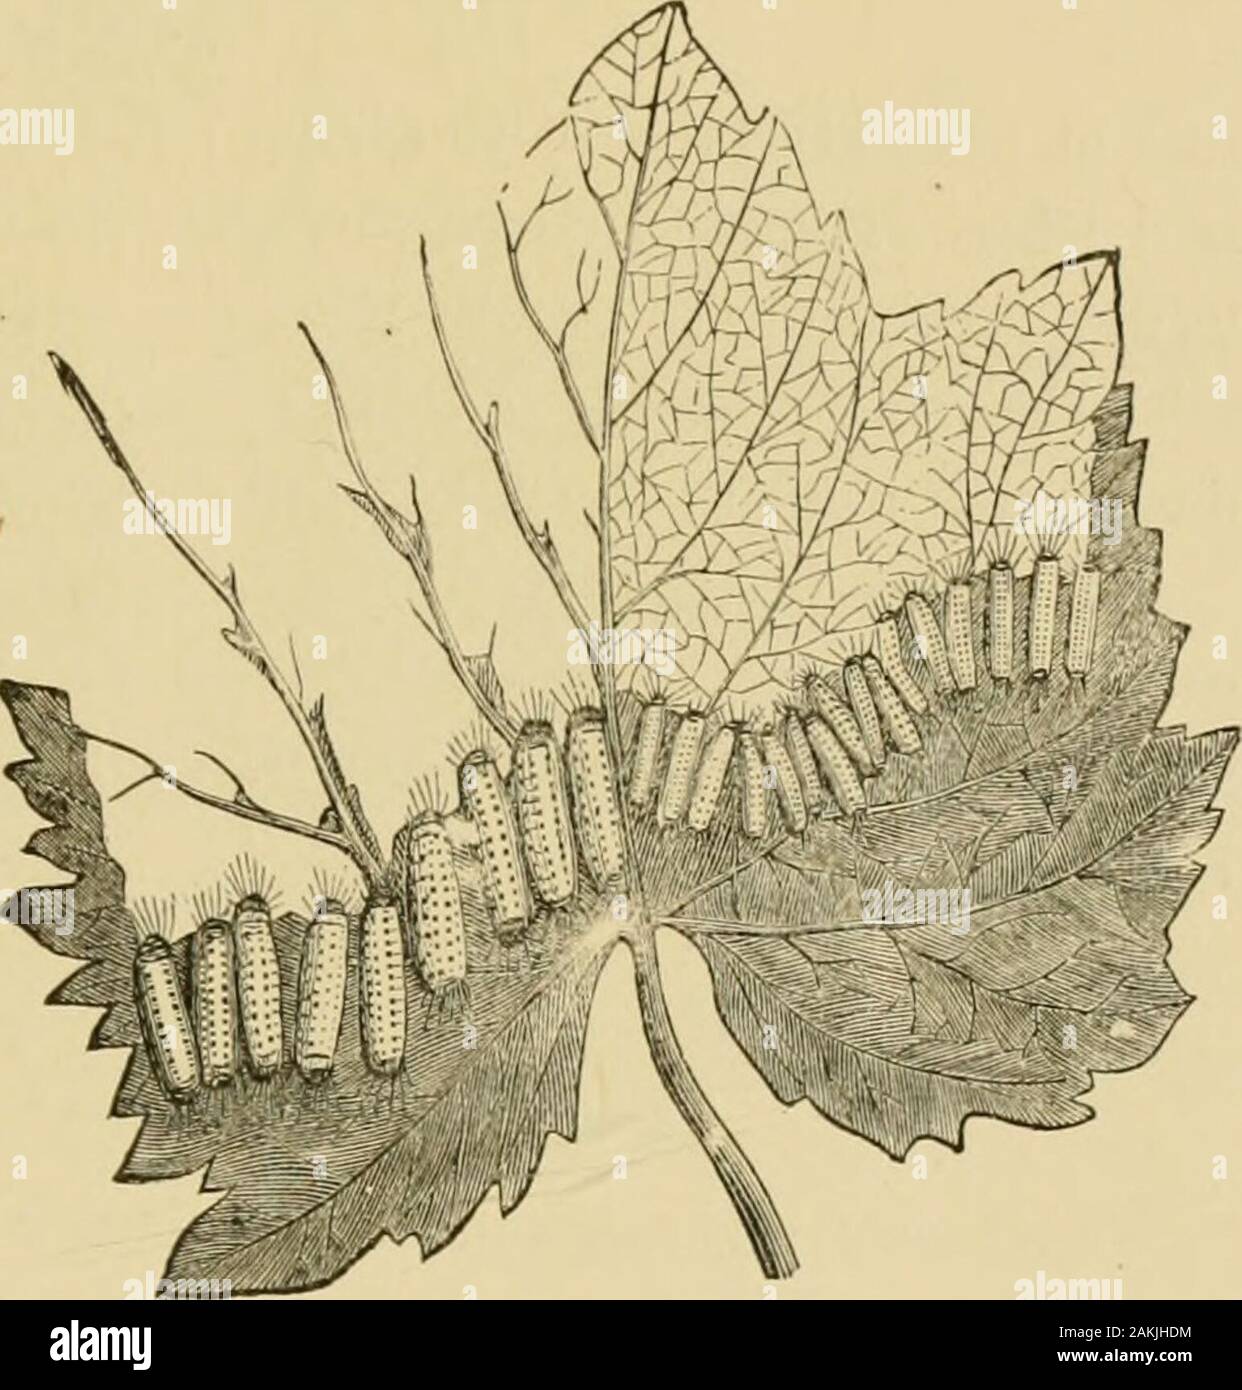 Insects injurious to fruits . ownin Fig. 275. The egg-clusters from which these larvae pro-ceed, consisting of twenty eggs or more. Fig. 275. are fastened by themoth to the underside of the leaves.While young, thelittle caterpillars eatonly the soft tissuesof the leaves, leavingthe fine net-work ofveins untouched, asshown on the rightof the figure, butas they grow olderthey devour all butthe larger veins, asshown on the oppo-site side. They acquire full growth in August, when theymeasure about six-tenths of an inch in length, are of a yellowcolor, slightly hairy (see Fig. 276, a), with a trans Stock Photo